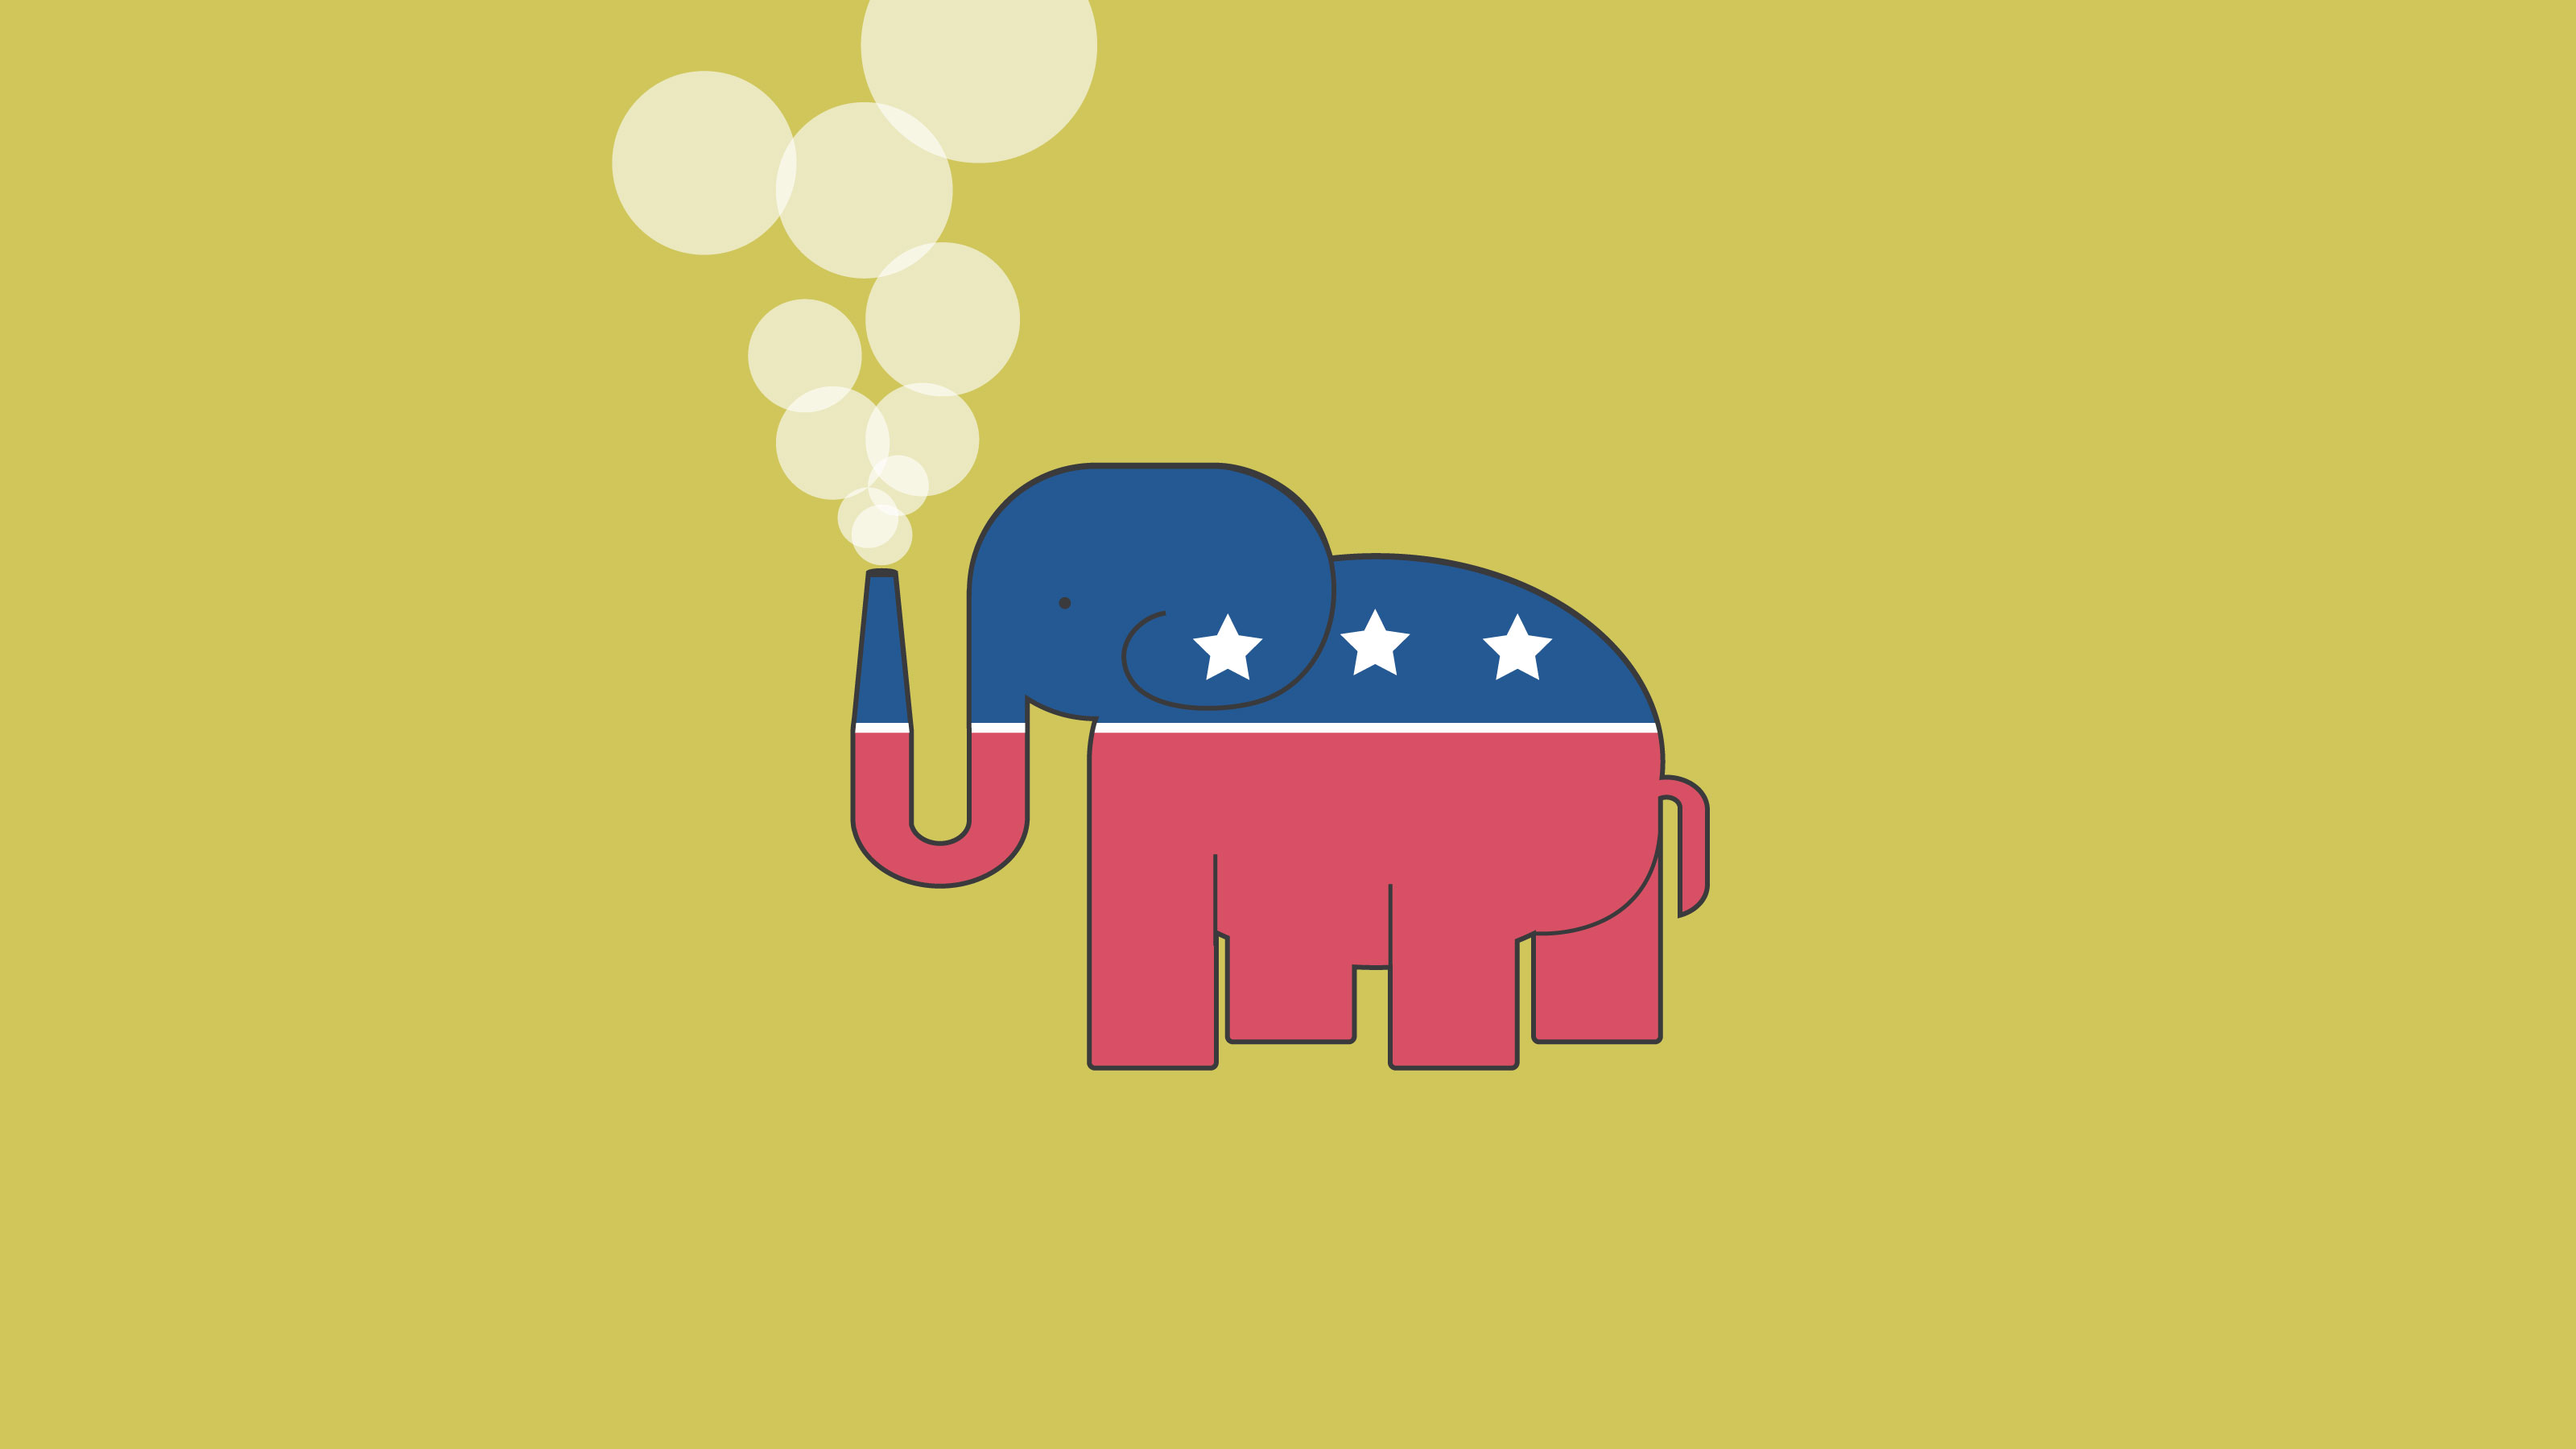 An illustration of the GOP elephant with nuclear chimney for a trunk